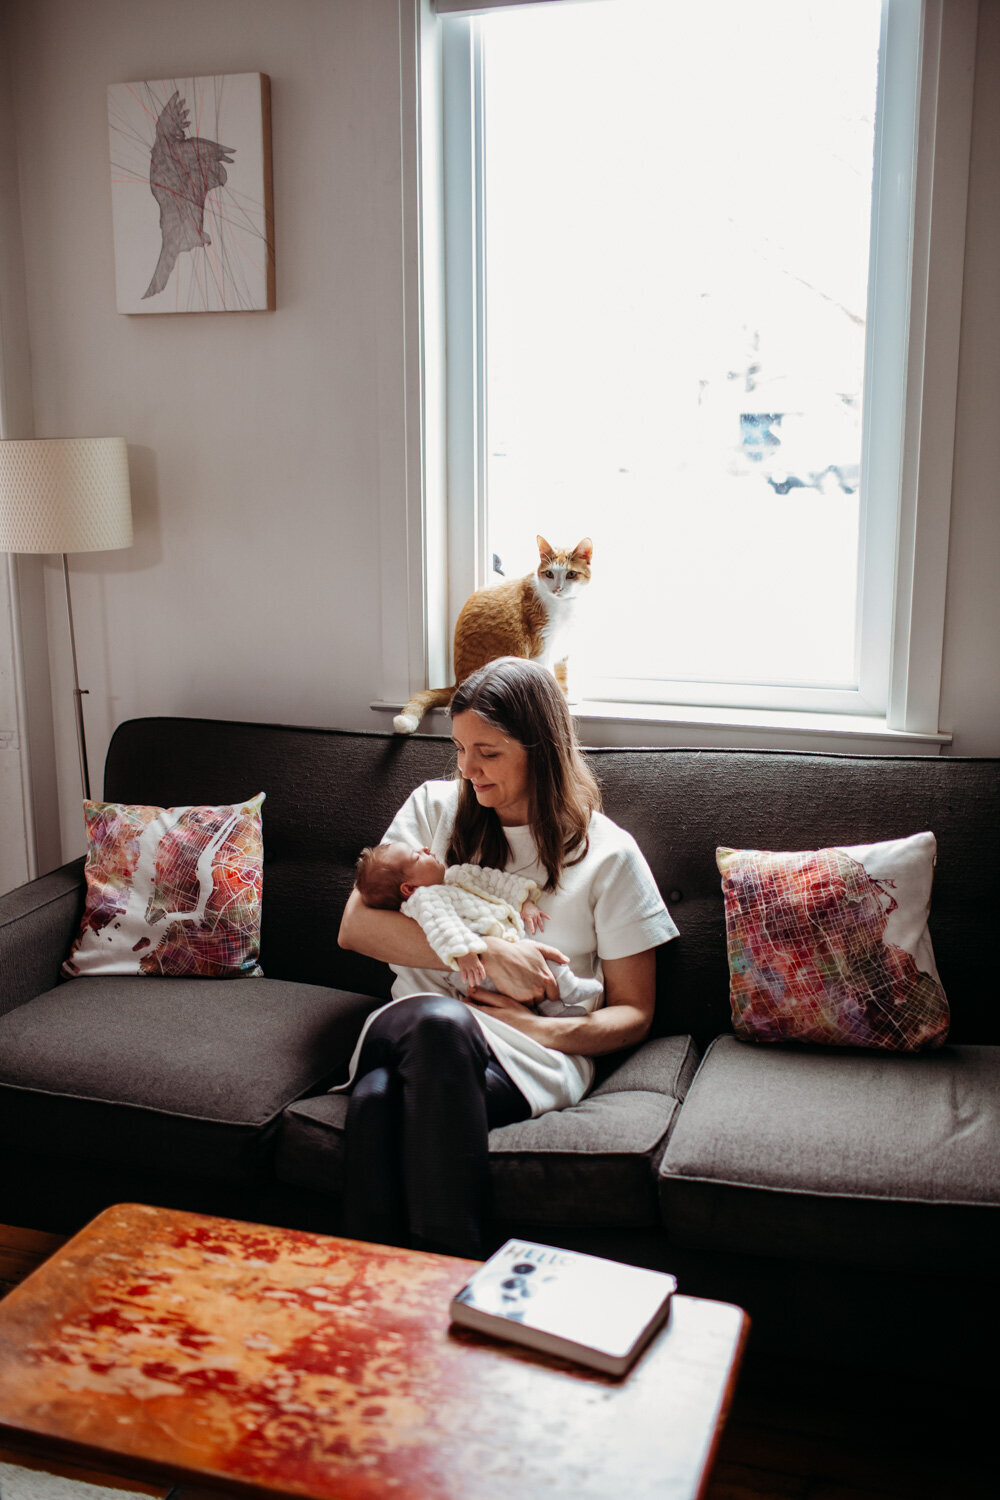 mom and newborn daughter sitting on couch with orange cat in window behind them